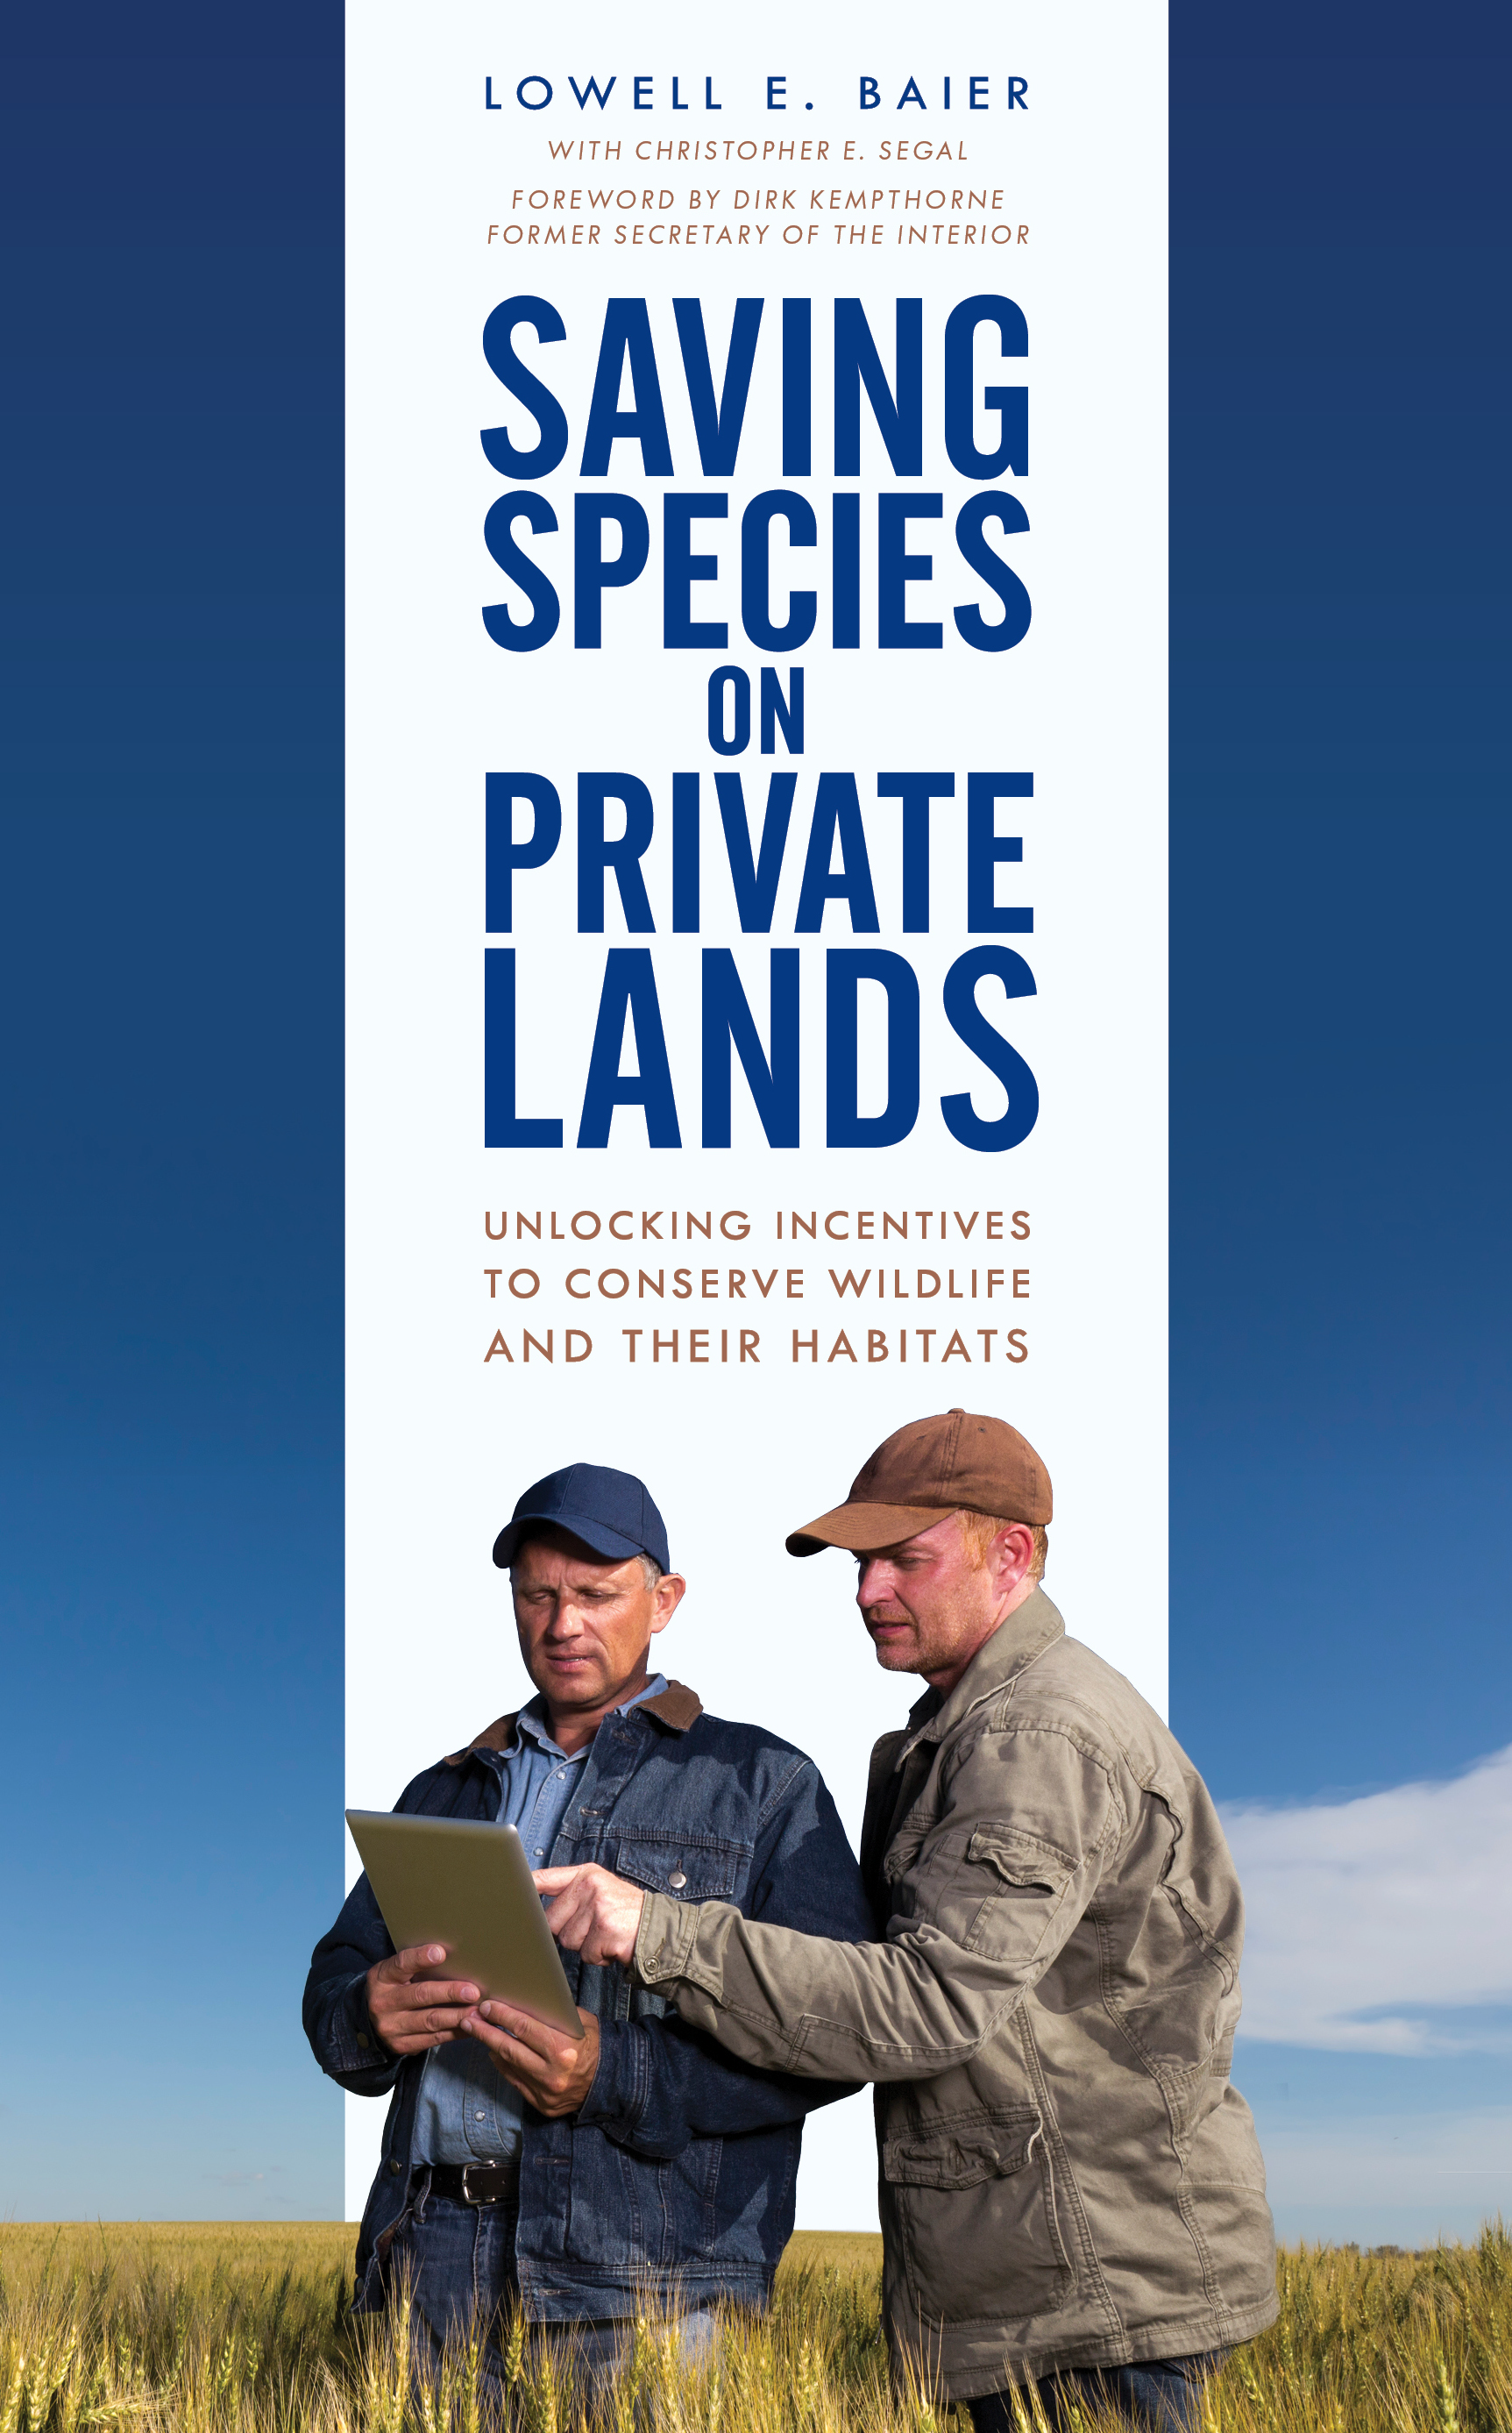 Cover of Saving Species on Private Lands, by Lowell E. Baier with Christopher Segal. Rowman & Littlefield, publisher.